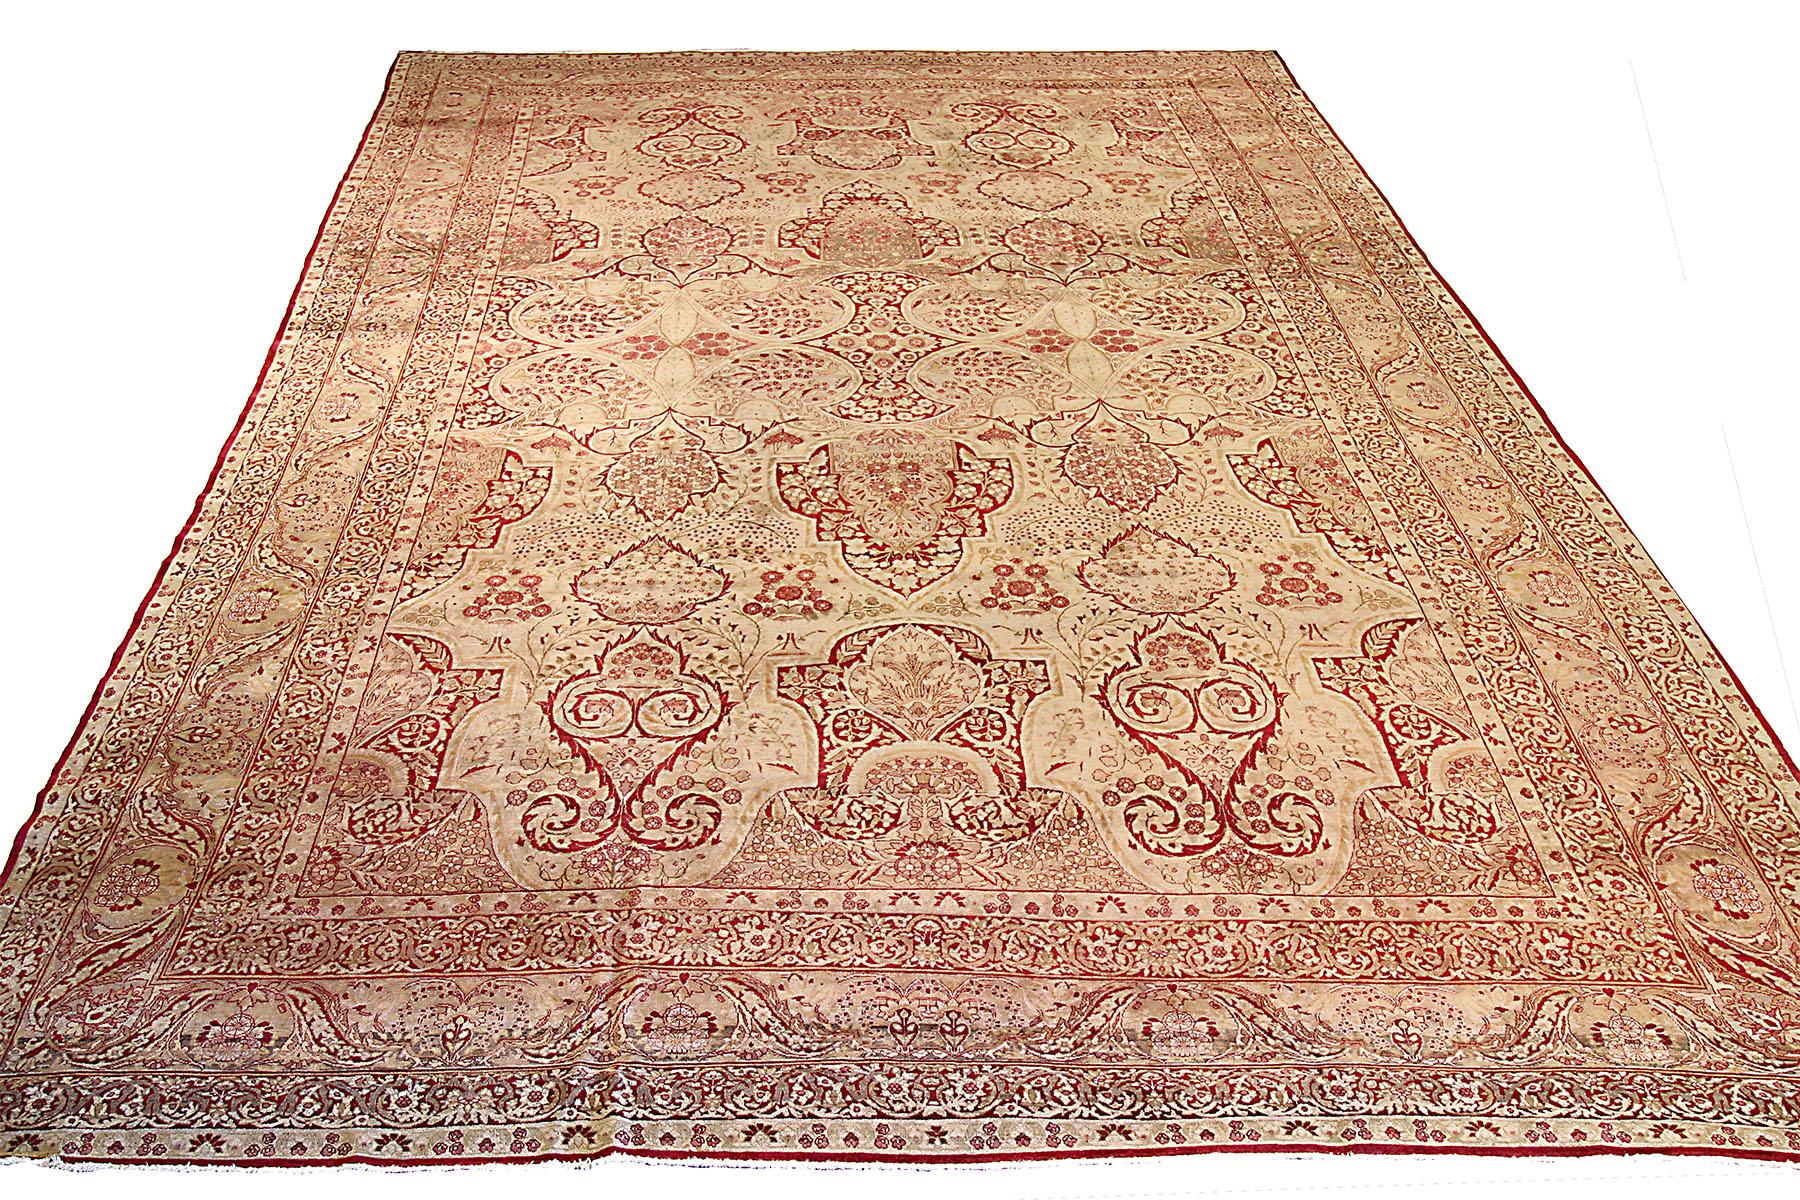 Rare antique Persian rug handwoven in the 1920s from the finest sheep’s wool and colored with all-natural vegetable dyes that are safe for humans and pets. It’s woven by master weavers of Yazd featuring an elegant ensemble of floral designs in deep